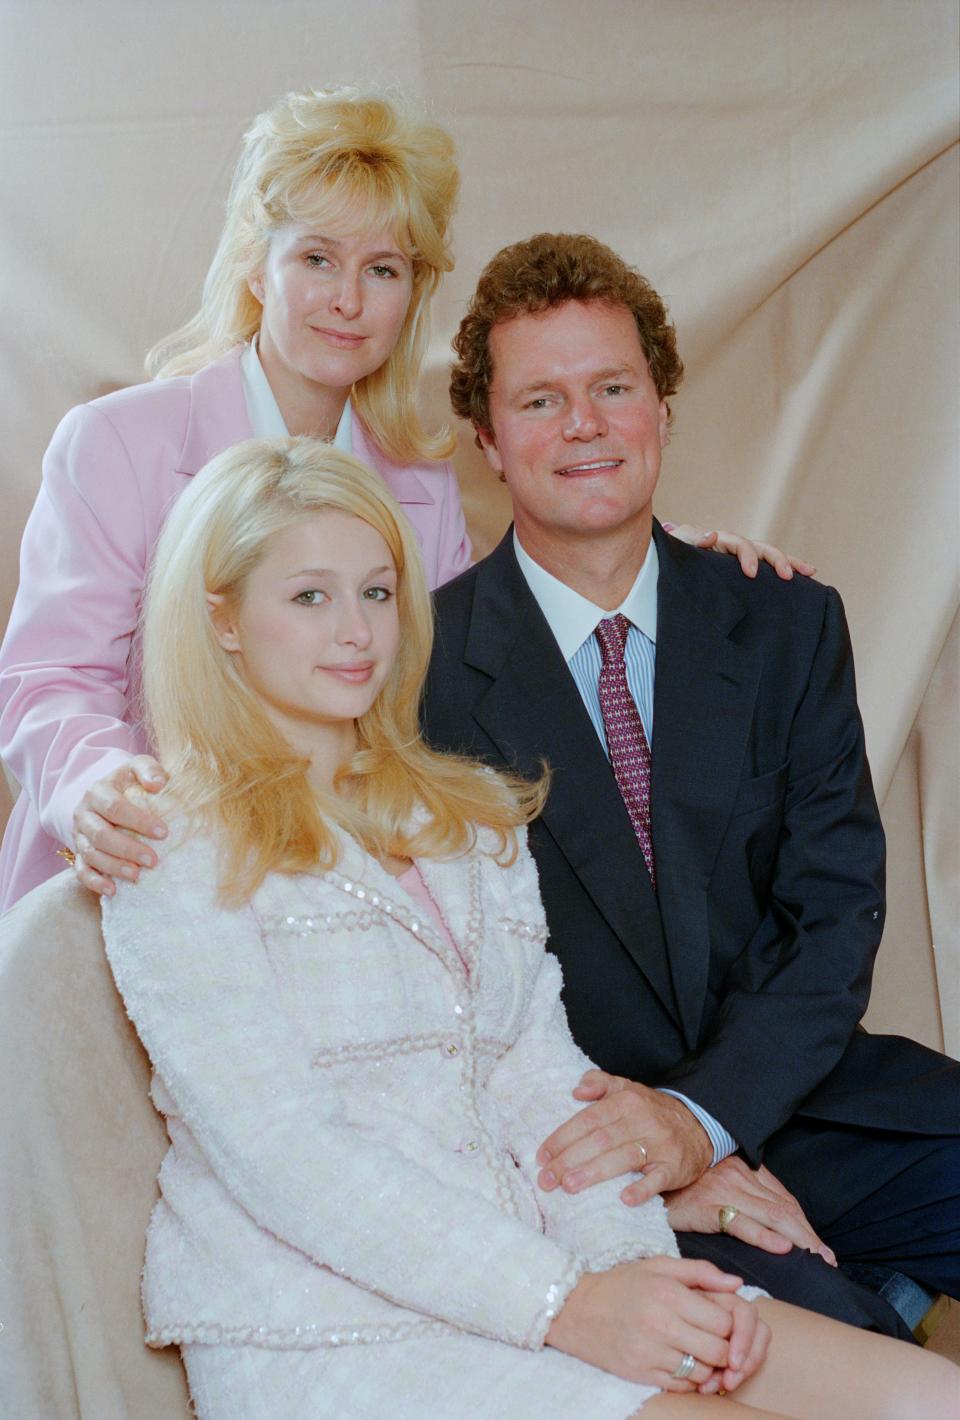 Paris Hilton with her parents, Kathy and Richard Hilton in 1996 before she was forced to attend a therapeutic boarding school.